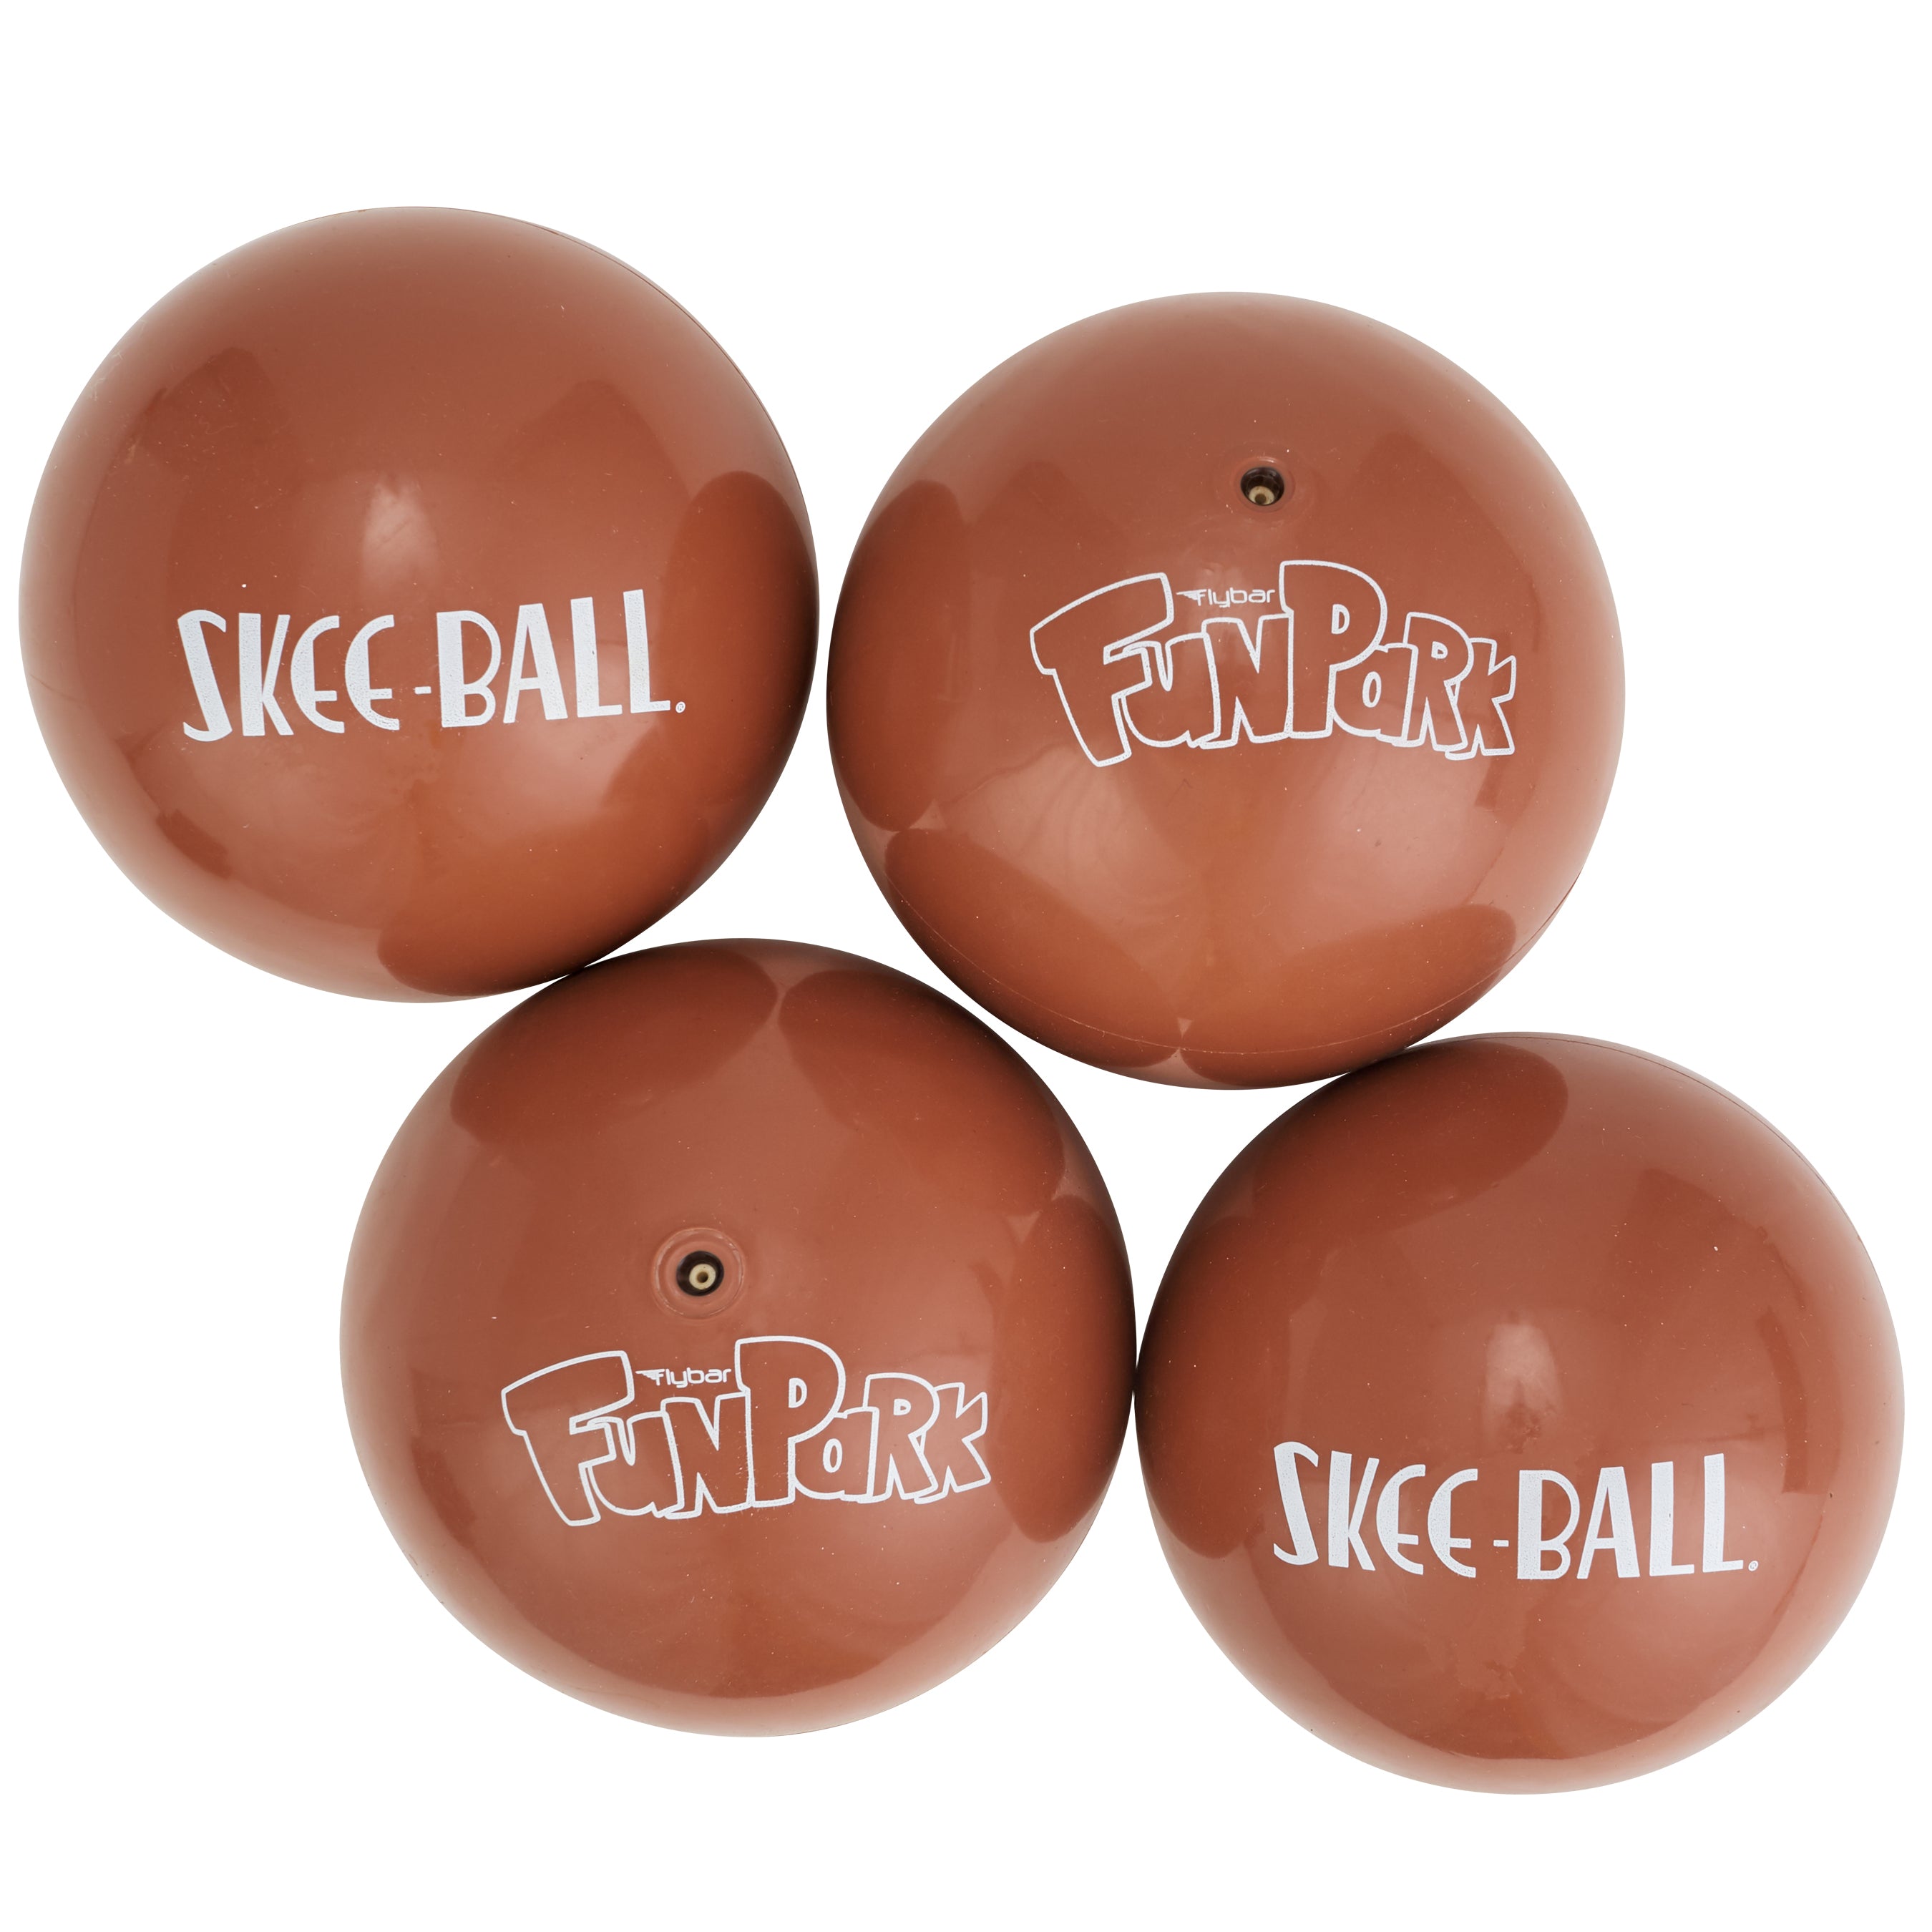 FunPark Skee-Ball Replacement Balls – 4 Pack